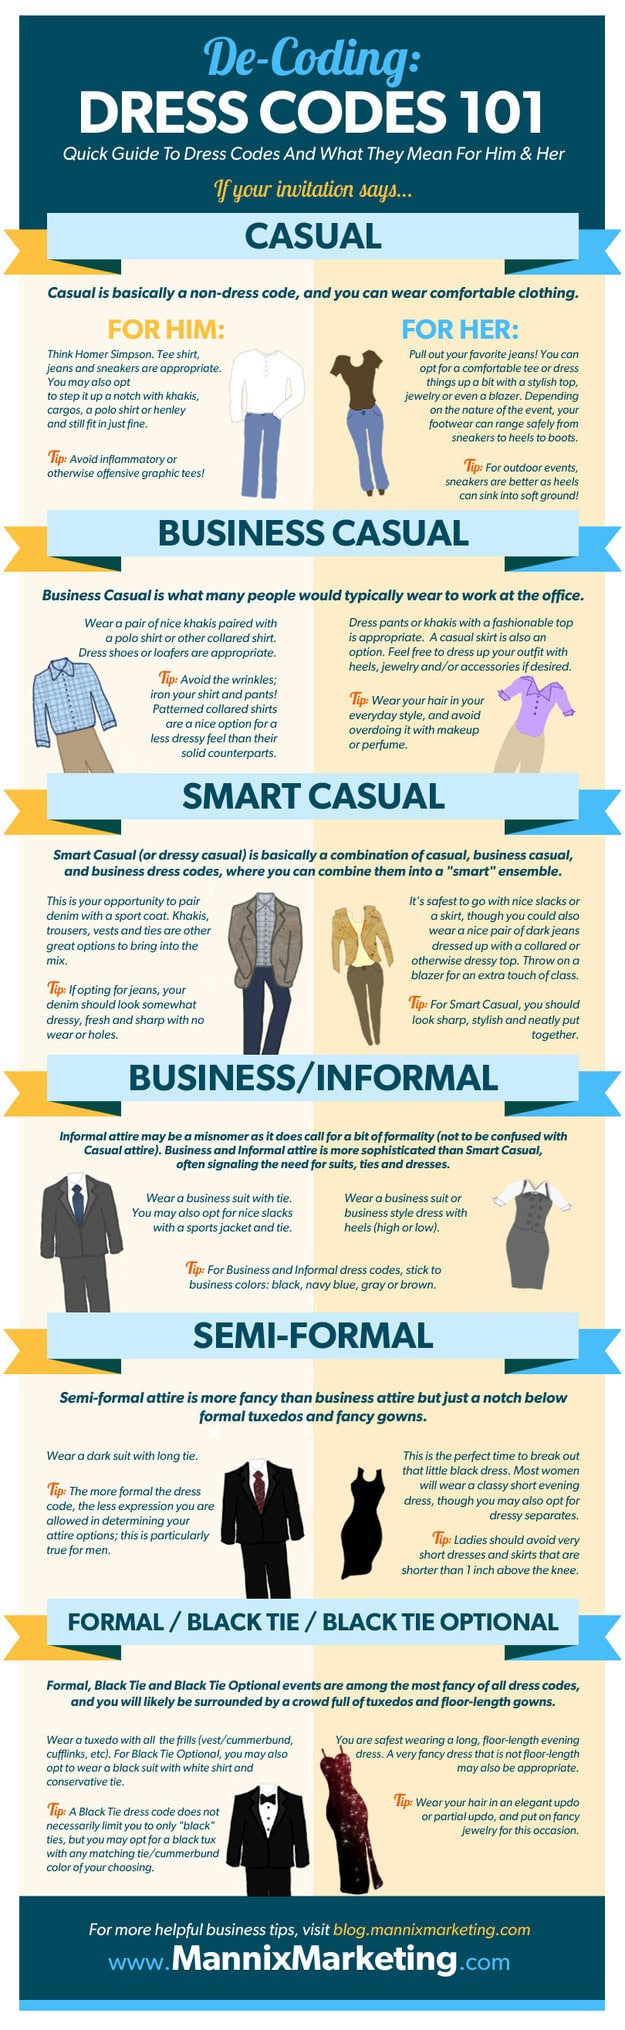 quick guide to dress code 